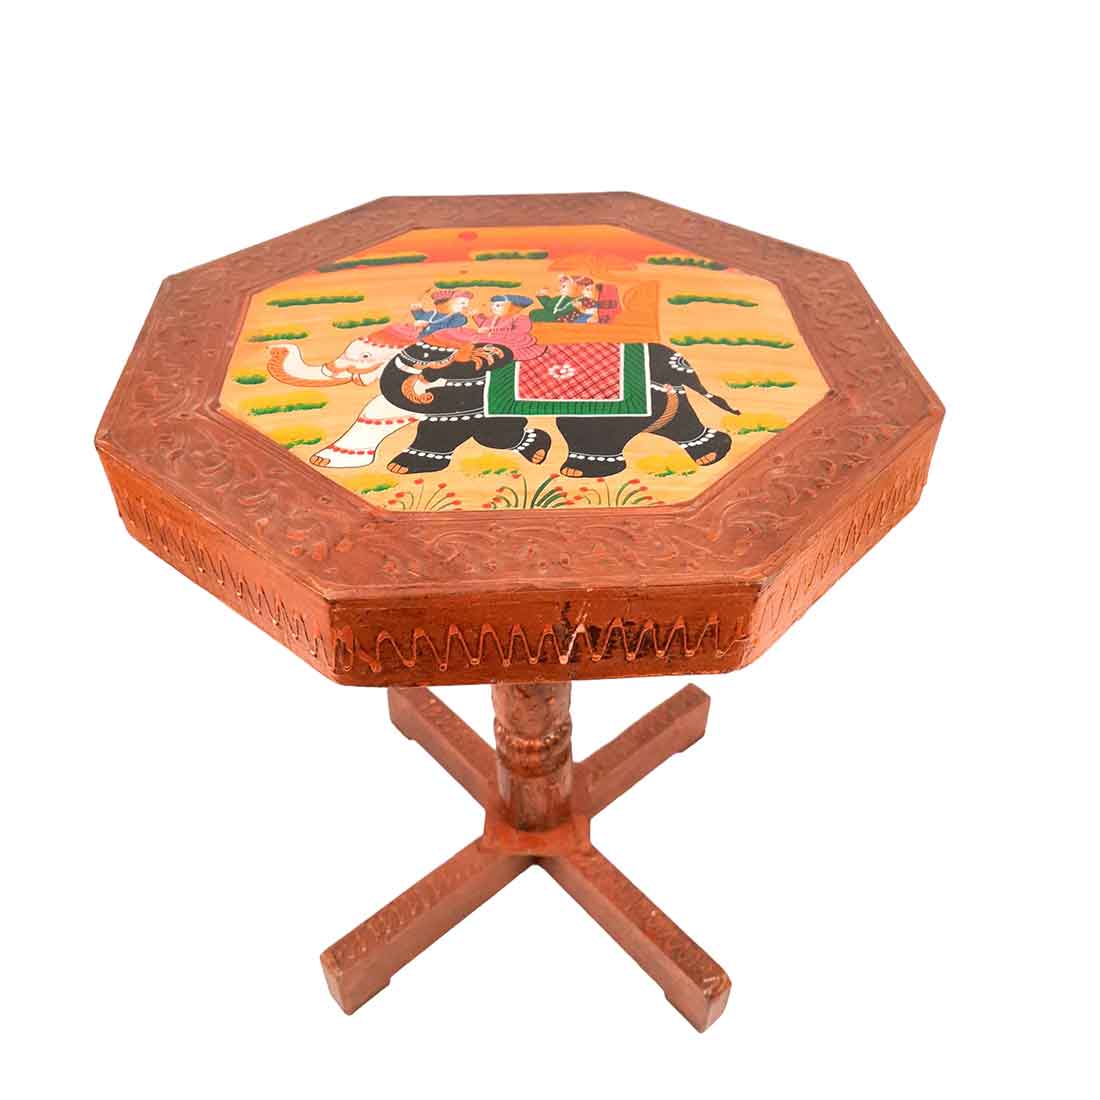 Wooden Side Table Cum Stool | End Table - for Living Room, Sitting, Plant Stand, Home Décor & Gifts - 18 Inch